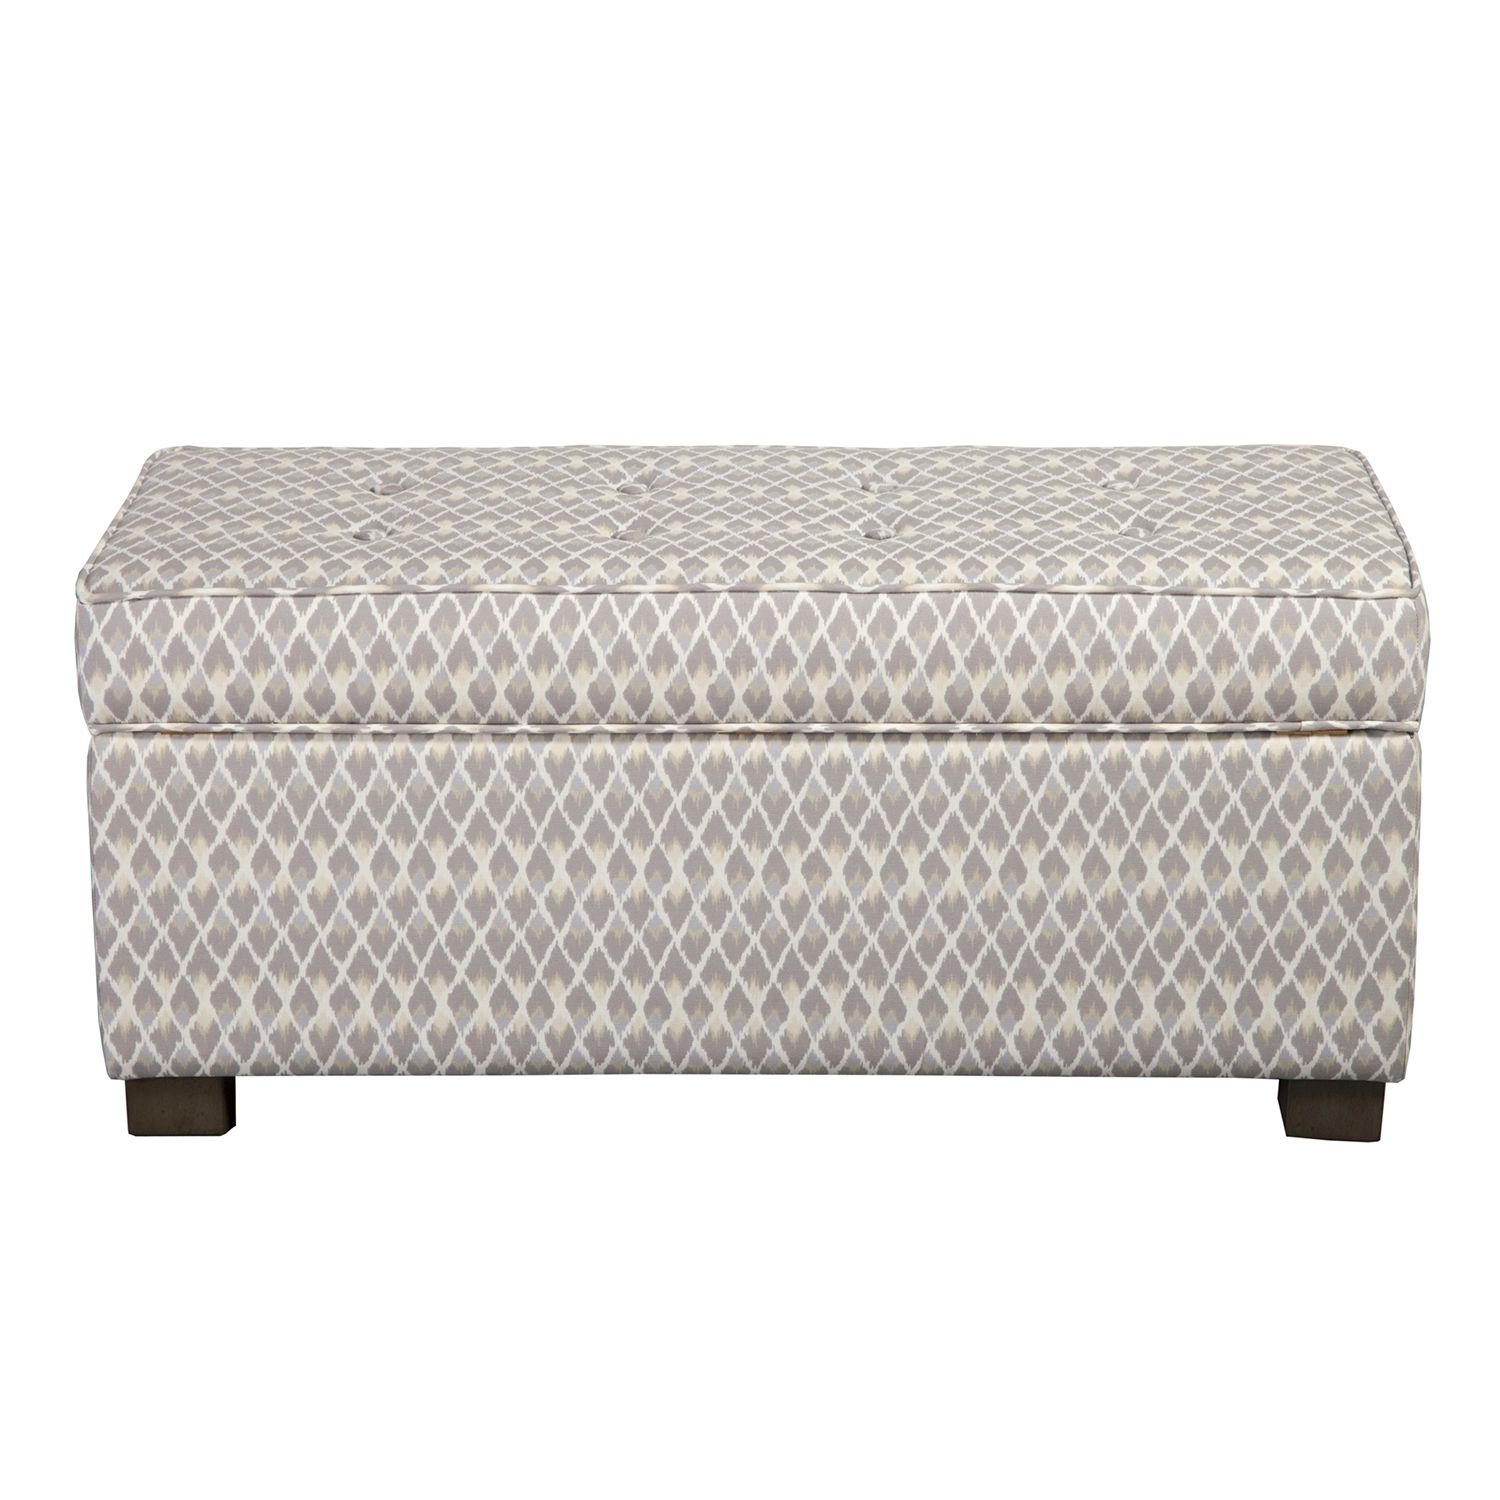 Image for HomePop Printed Storage Ottoman at Kohl's.